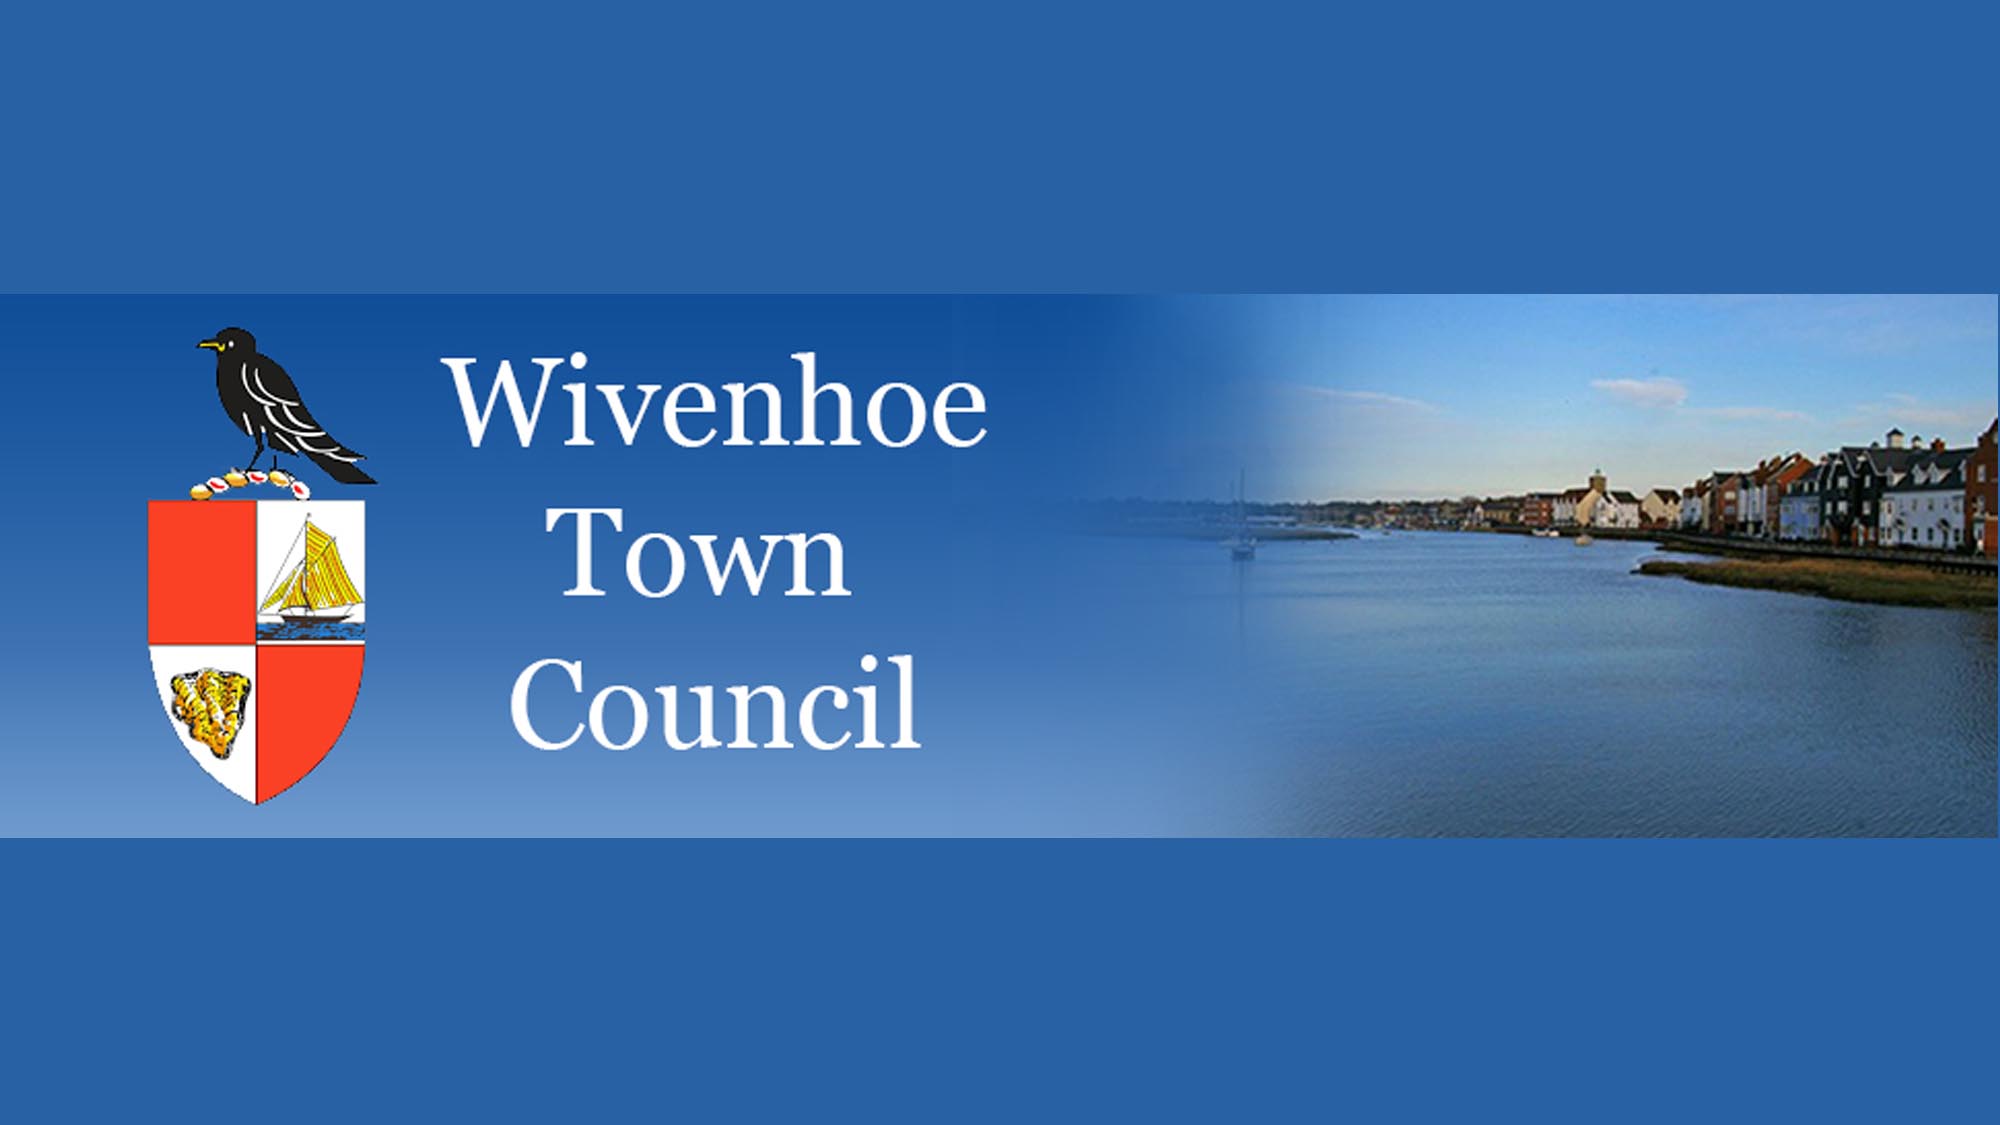 Wivenhoe Town Council